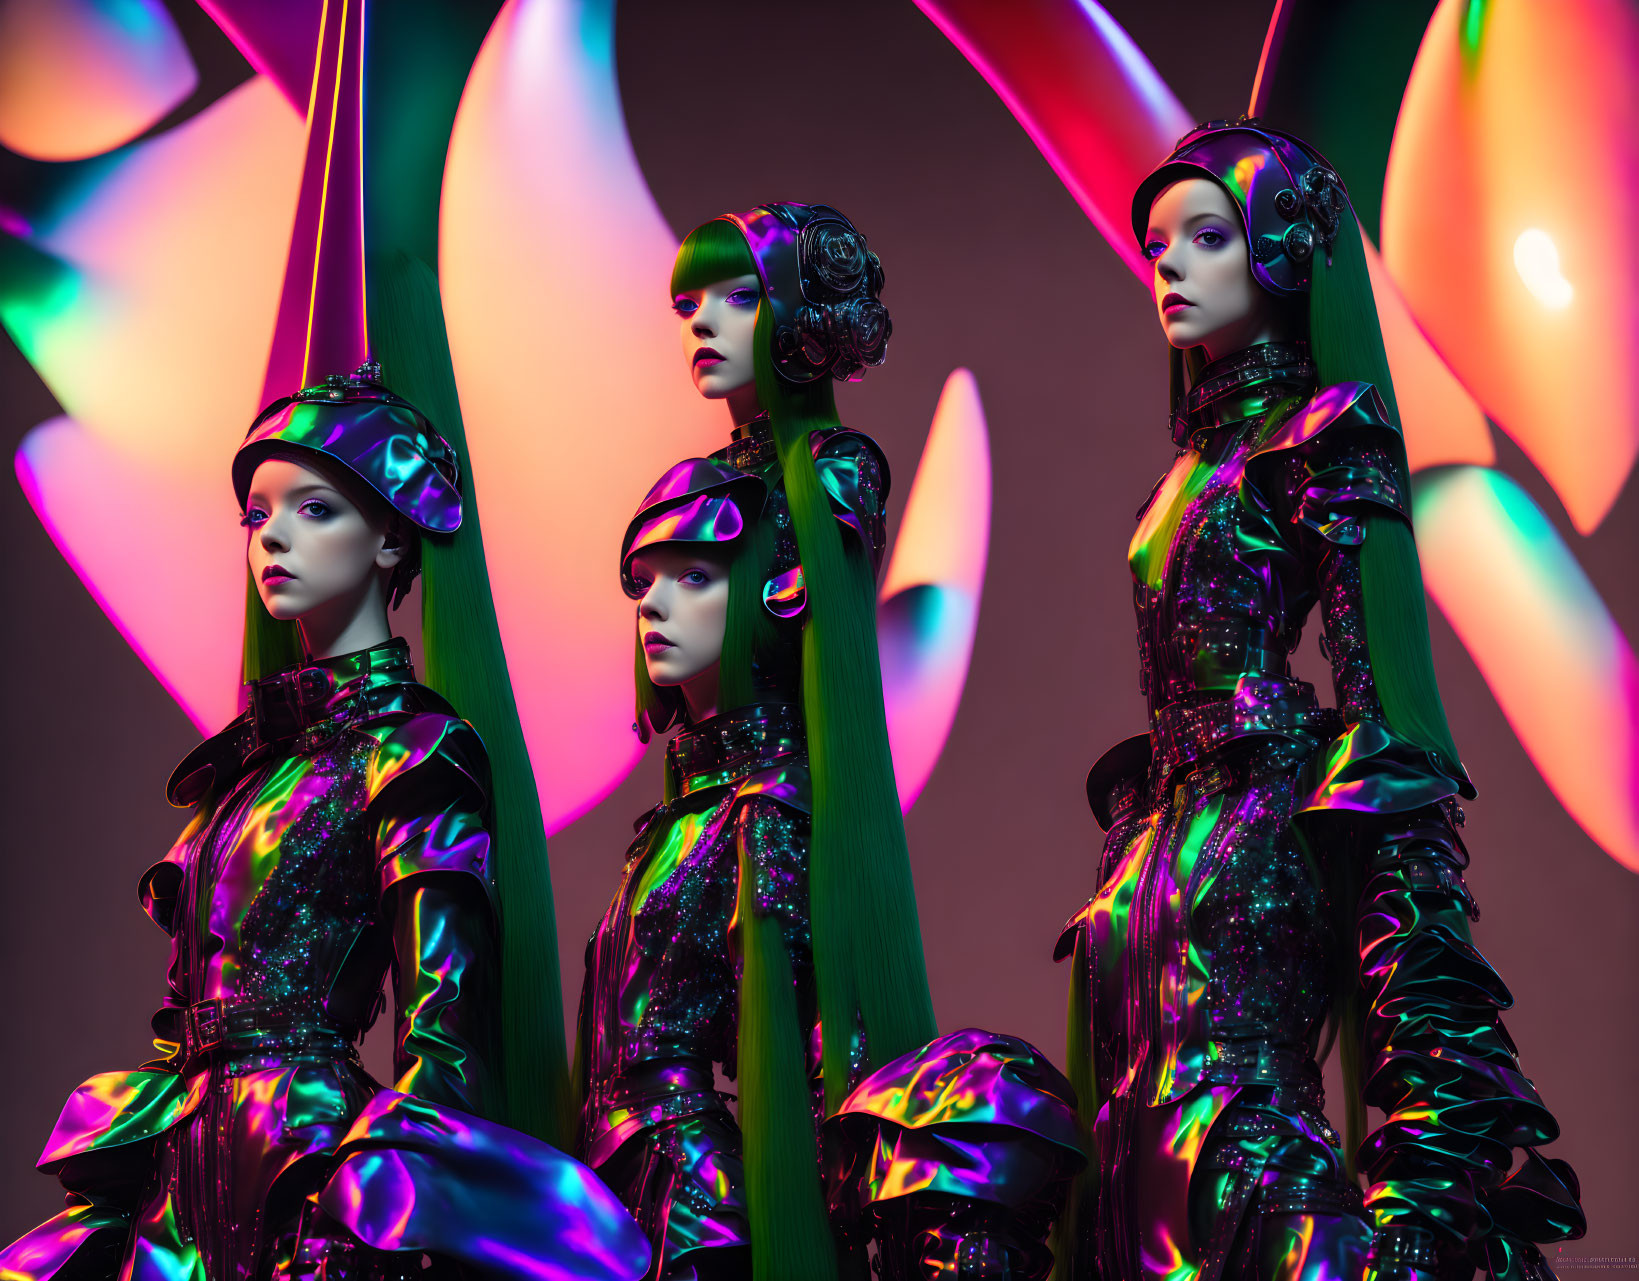 Four futuristic mannequins in metallic outfits against colorful backdrop